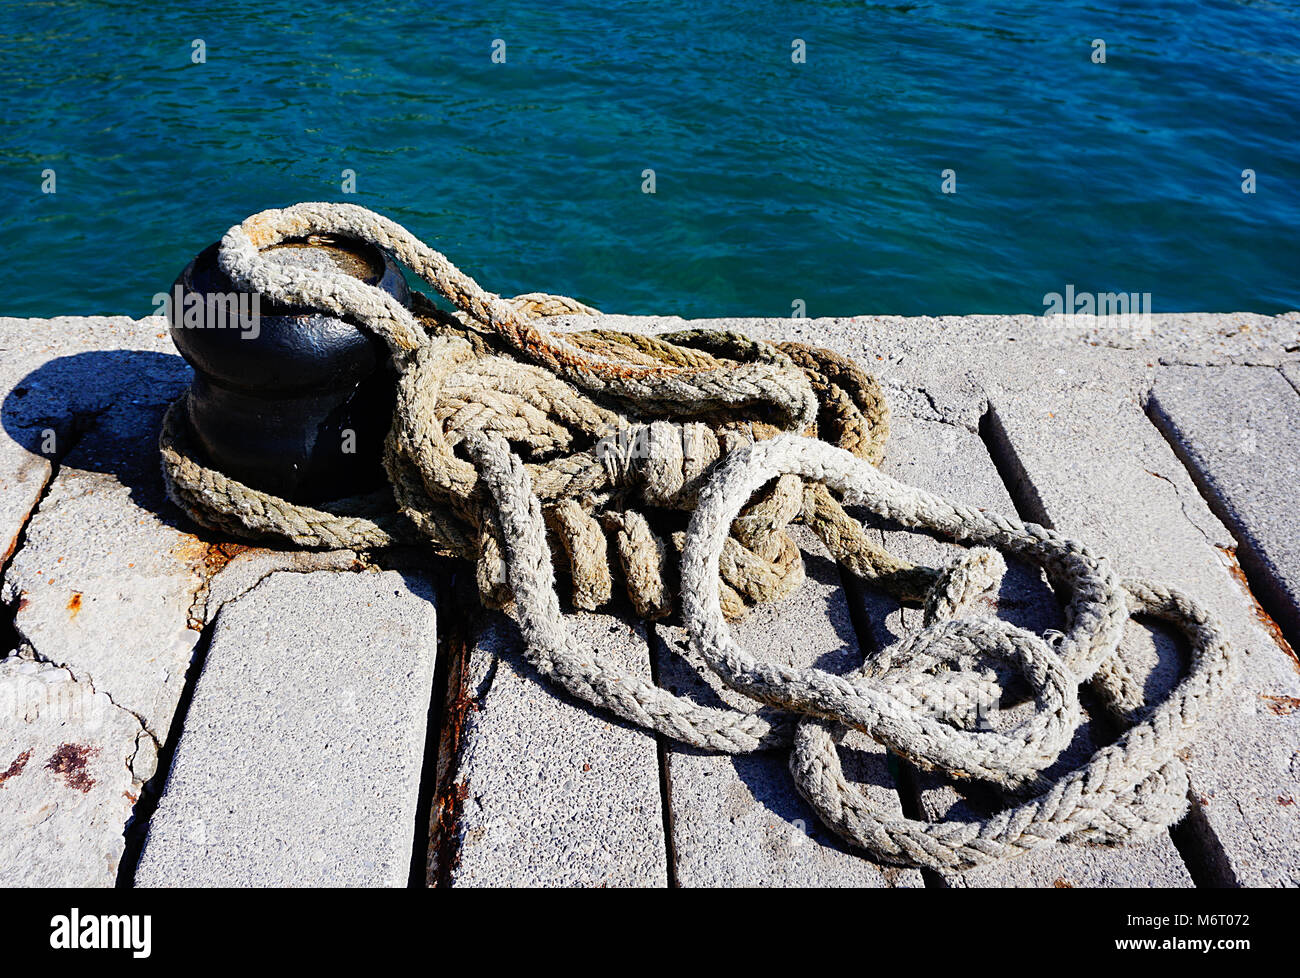 Old and rusty mooring rope on the marine dock near blue sea Stock Photo